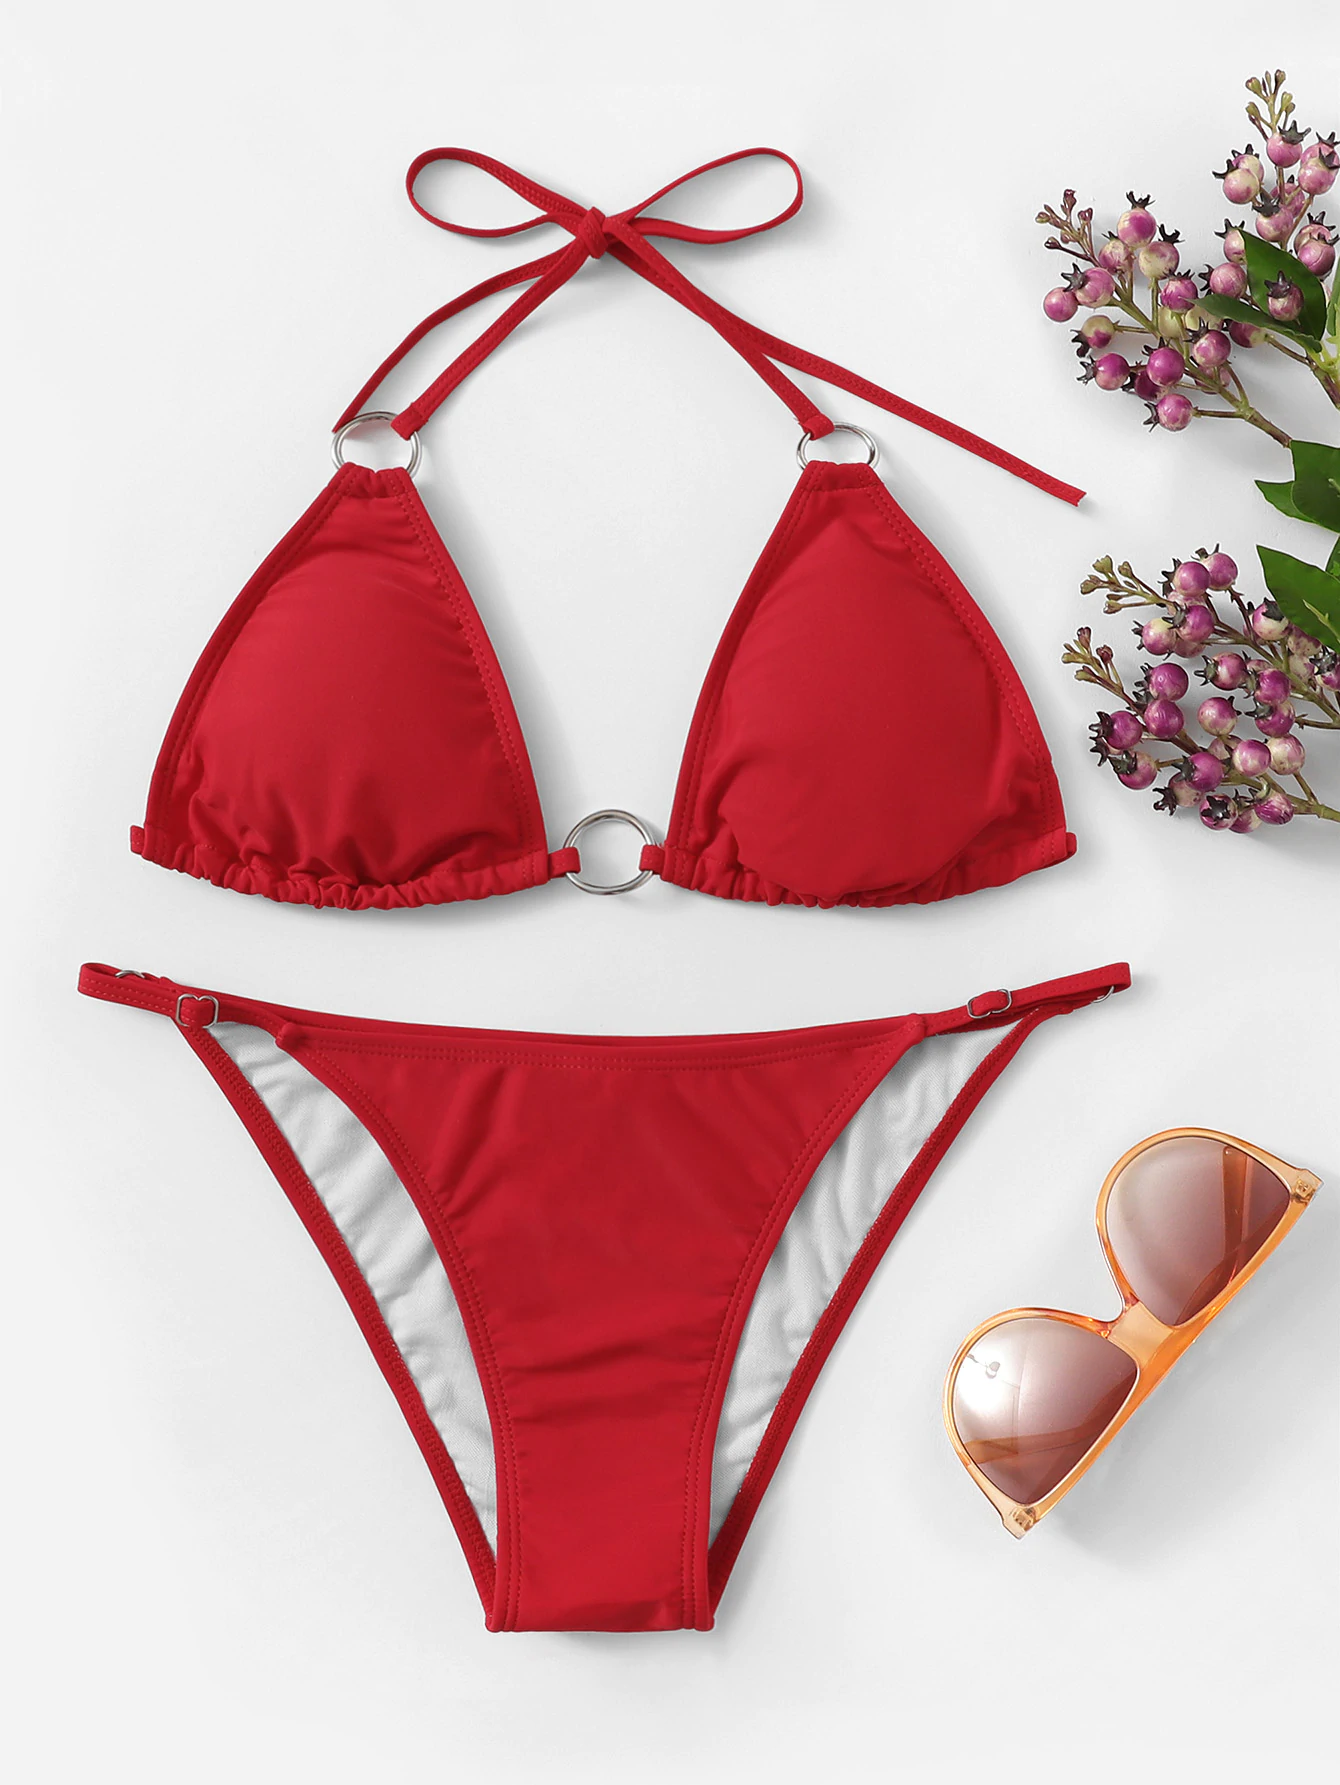 Super Purchasing for Red Bikini -
 Missadola Fashionable swimsuit with decorative rings – Yongdian